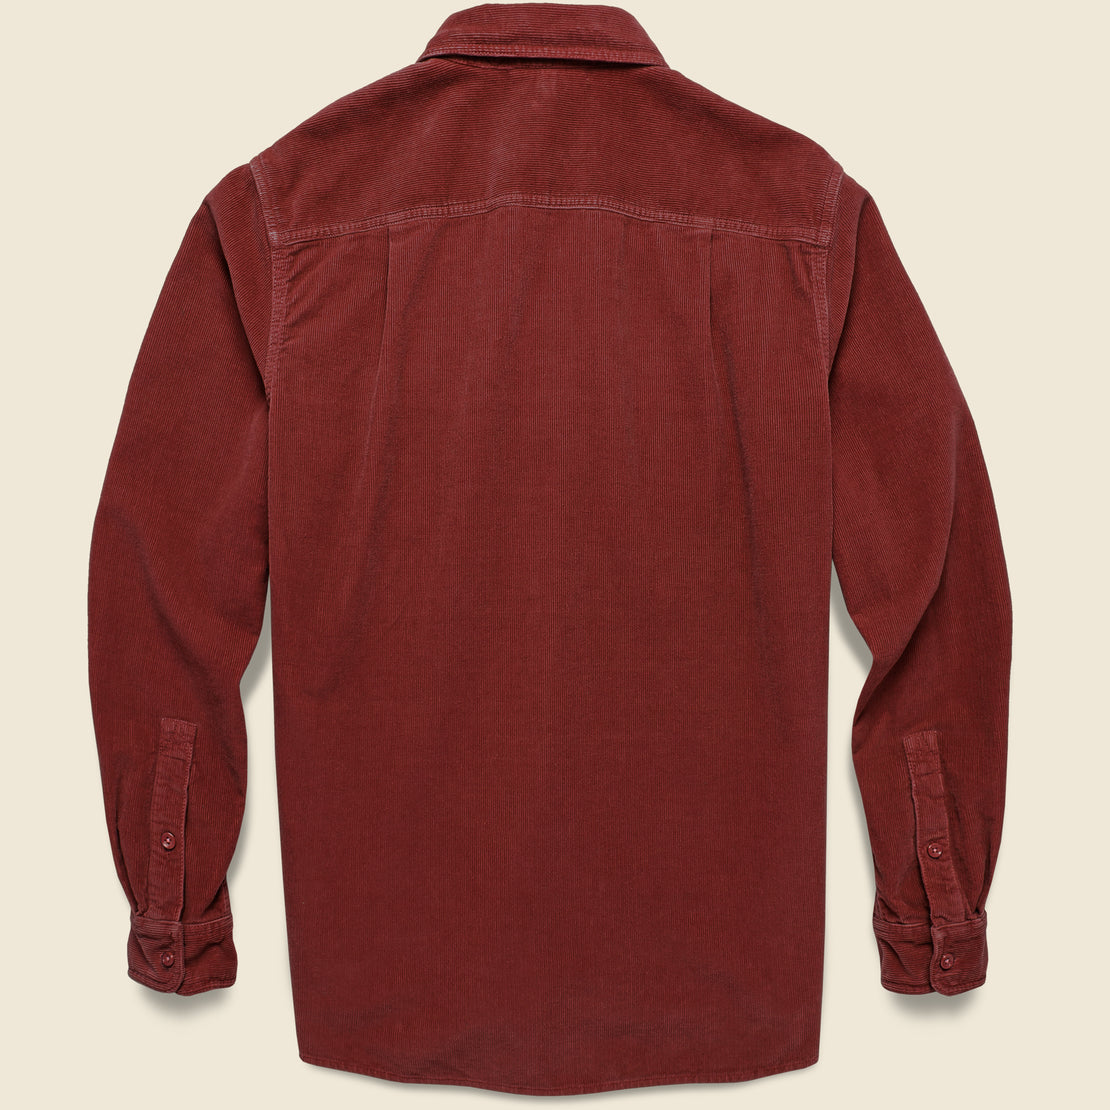 Popover Cord Shirt - Dark Currant - Alex Mill - STAG Provisions - Tops - L/S Woven - Corduroy